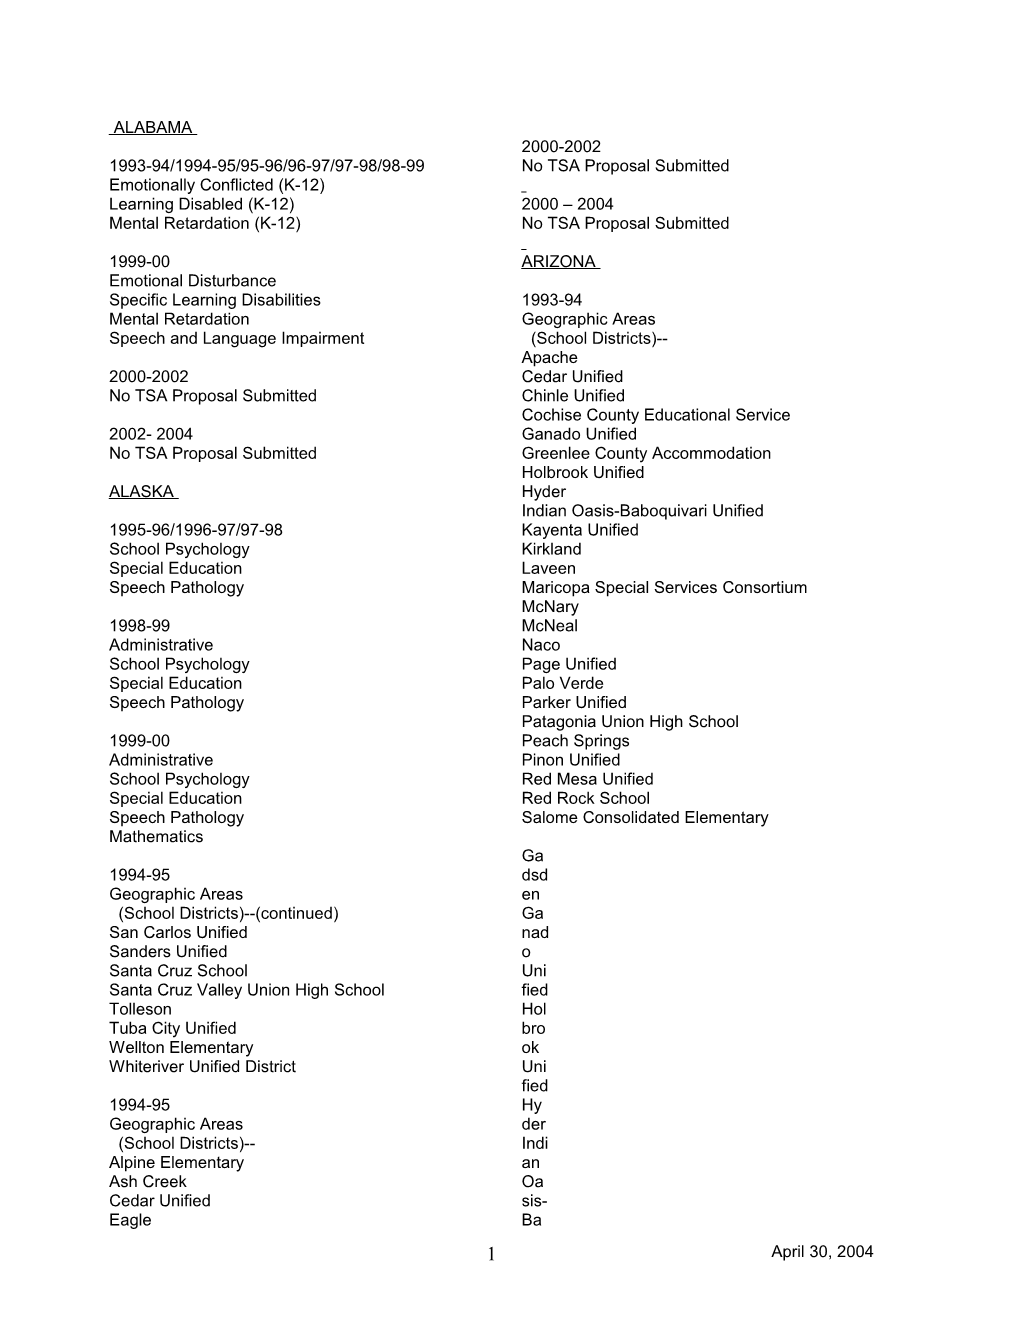 List of Teacher Shortage Areas As of April 30, 2004